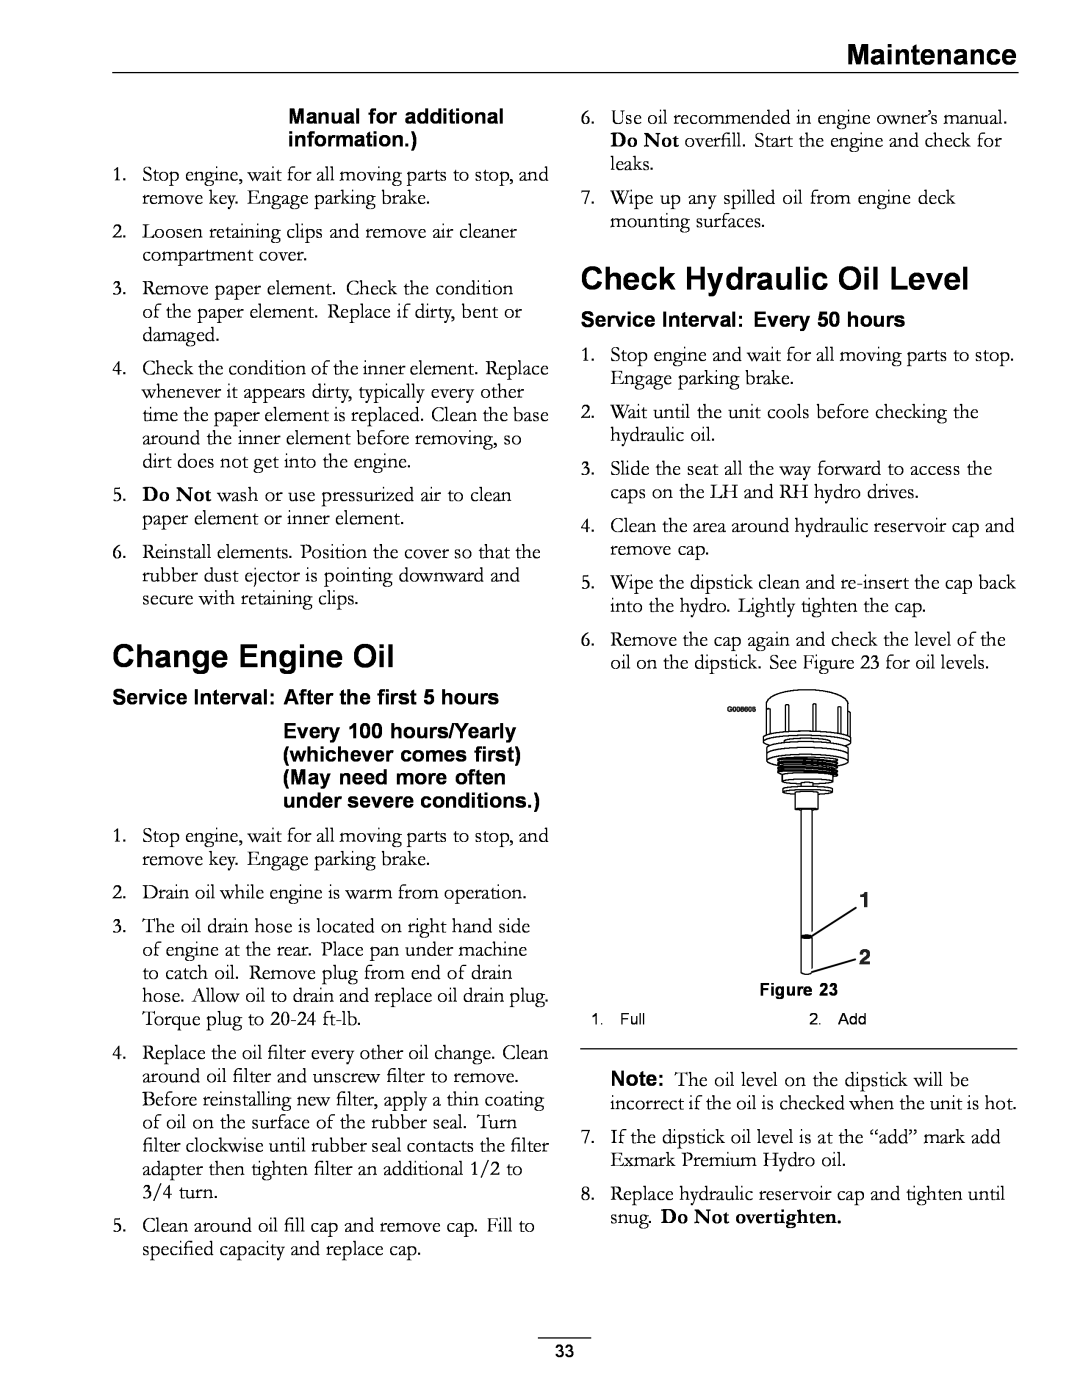 Exmark 000 & higher manual Change Engine Oil, Check Hydraulic Oil Level, Manual for additional information, Maintenance 